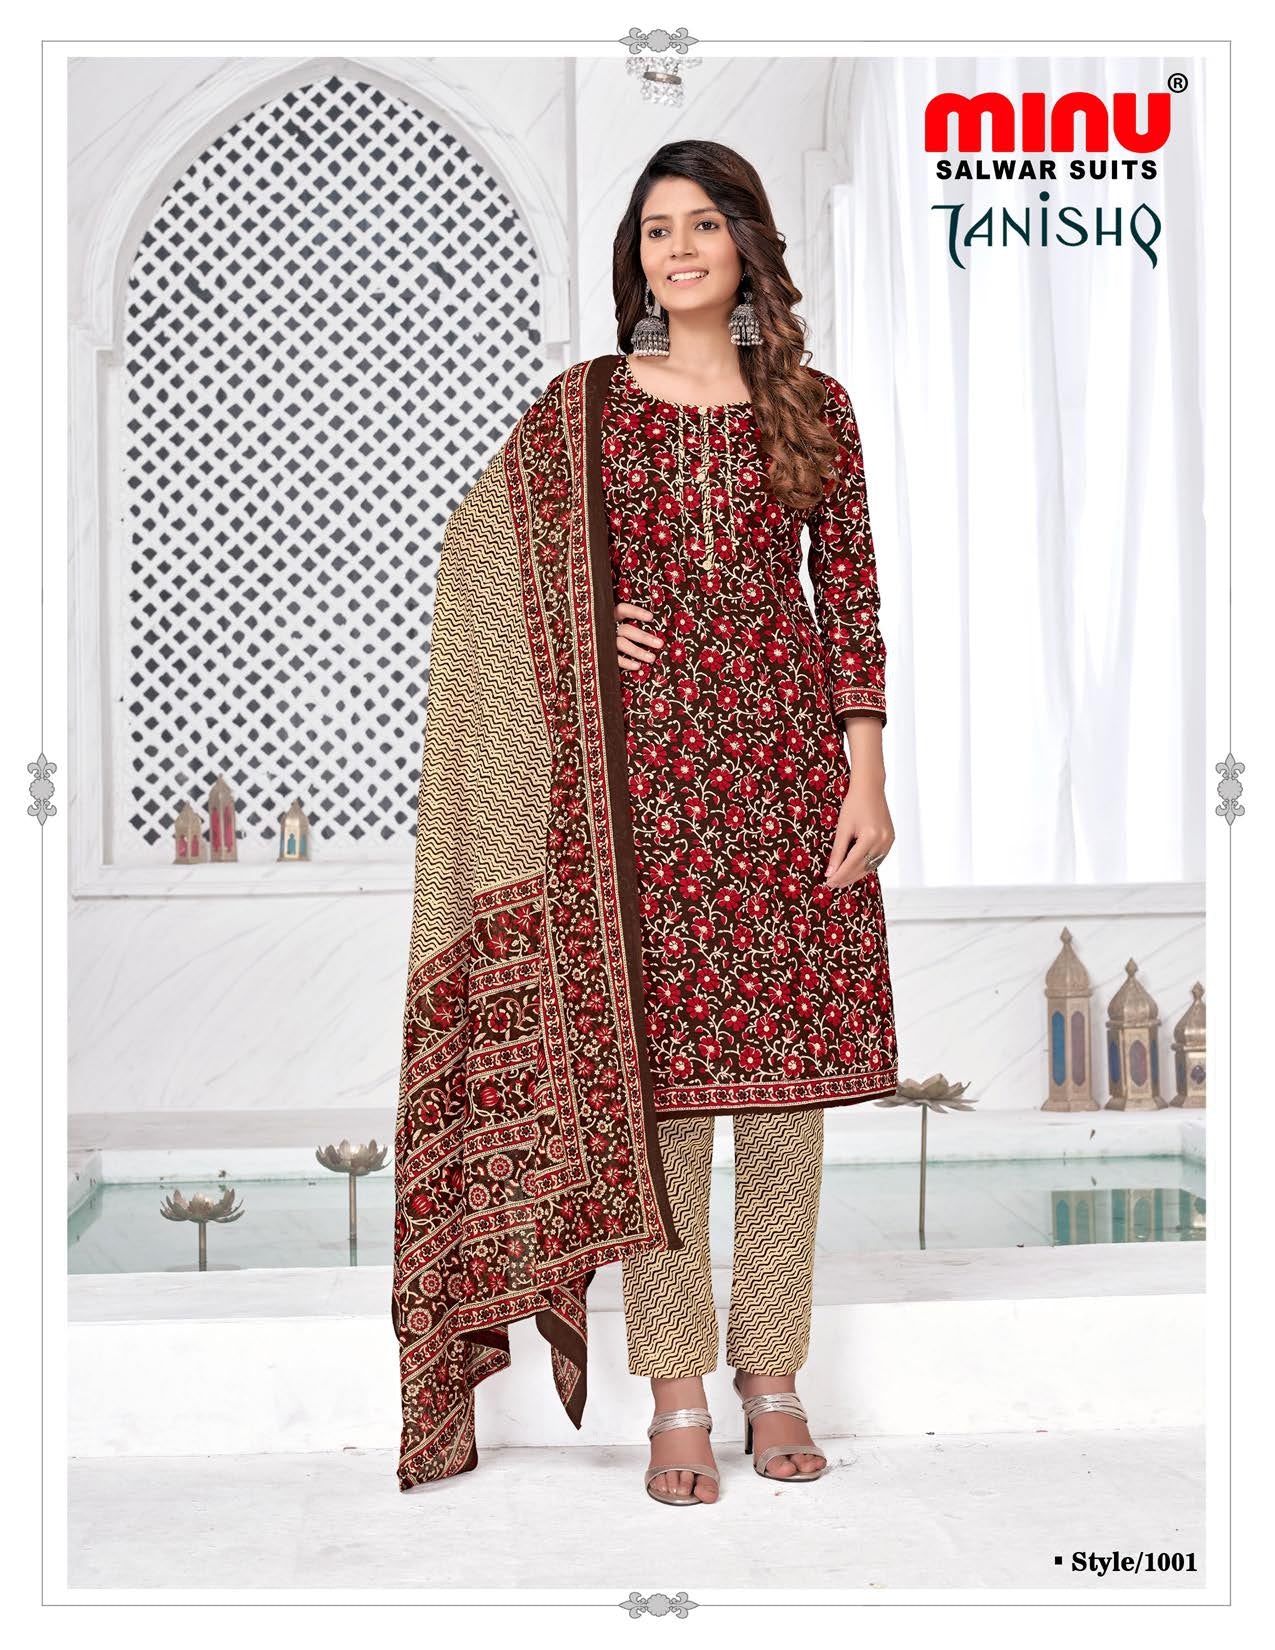 Unstitched Suit Material in Ludhiana, Unstitched Suit Material Manufacturers